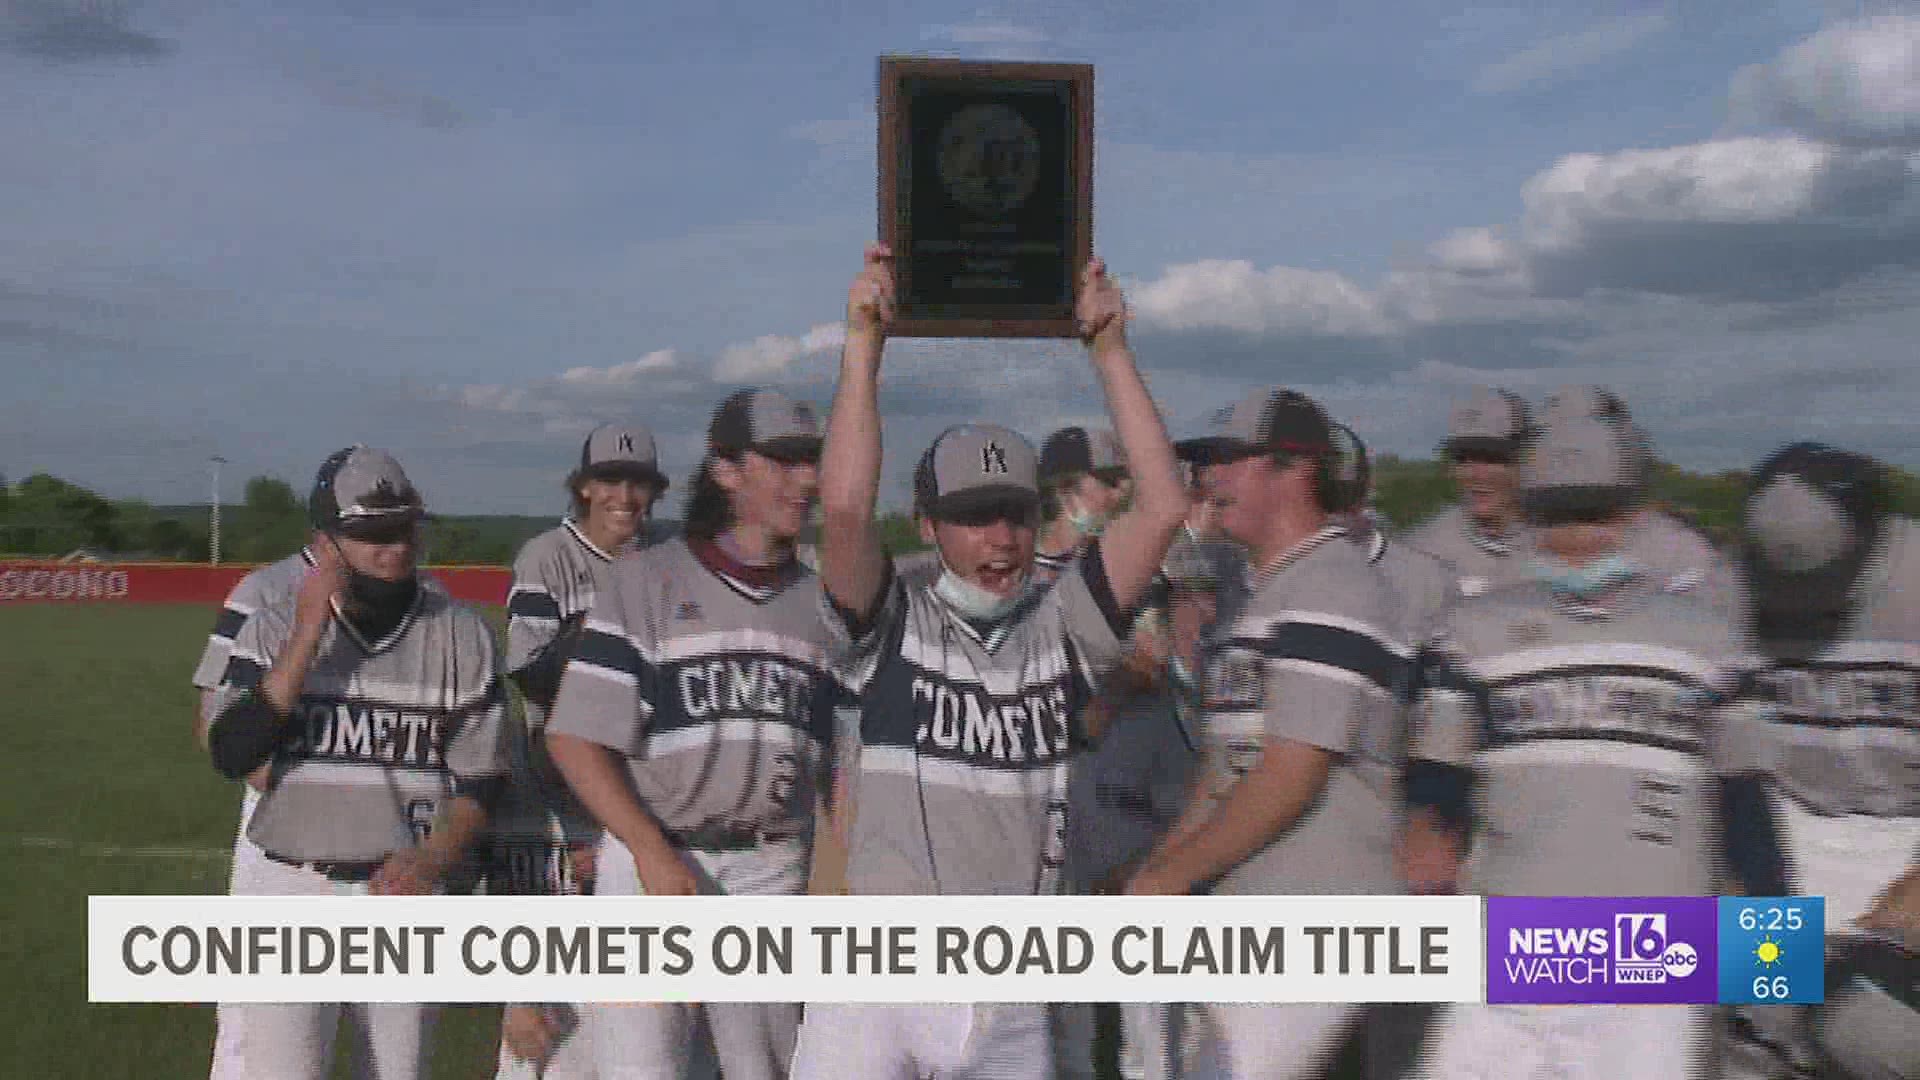 Abington Heights comes out as the 6th seed to win the District 2 'AAAAA' HS baseball Championship.